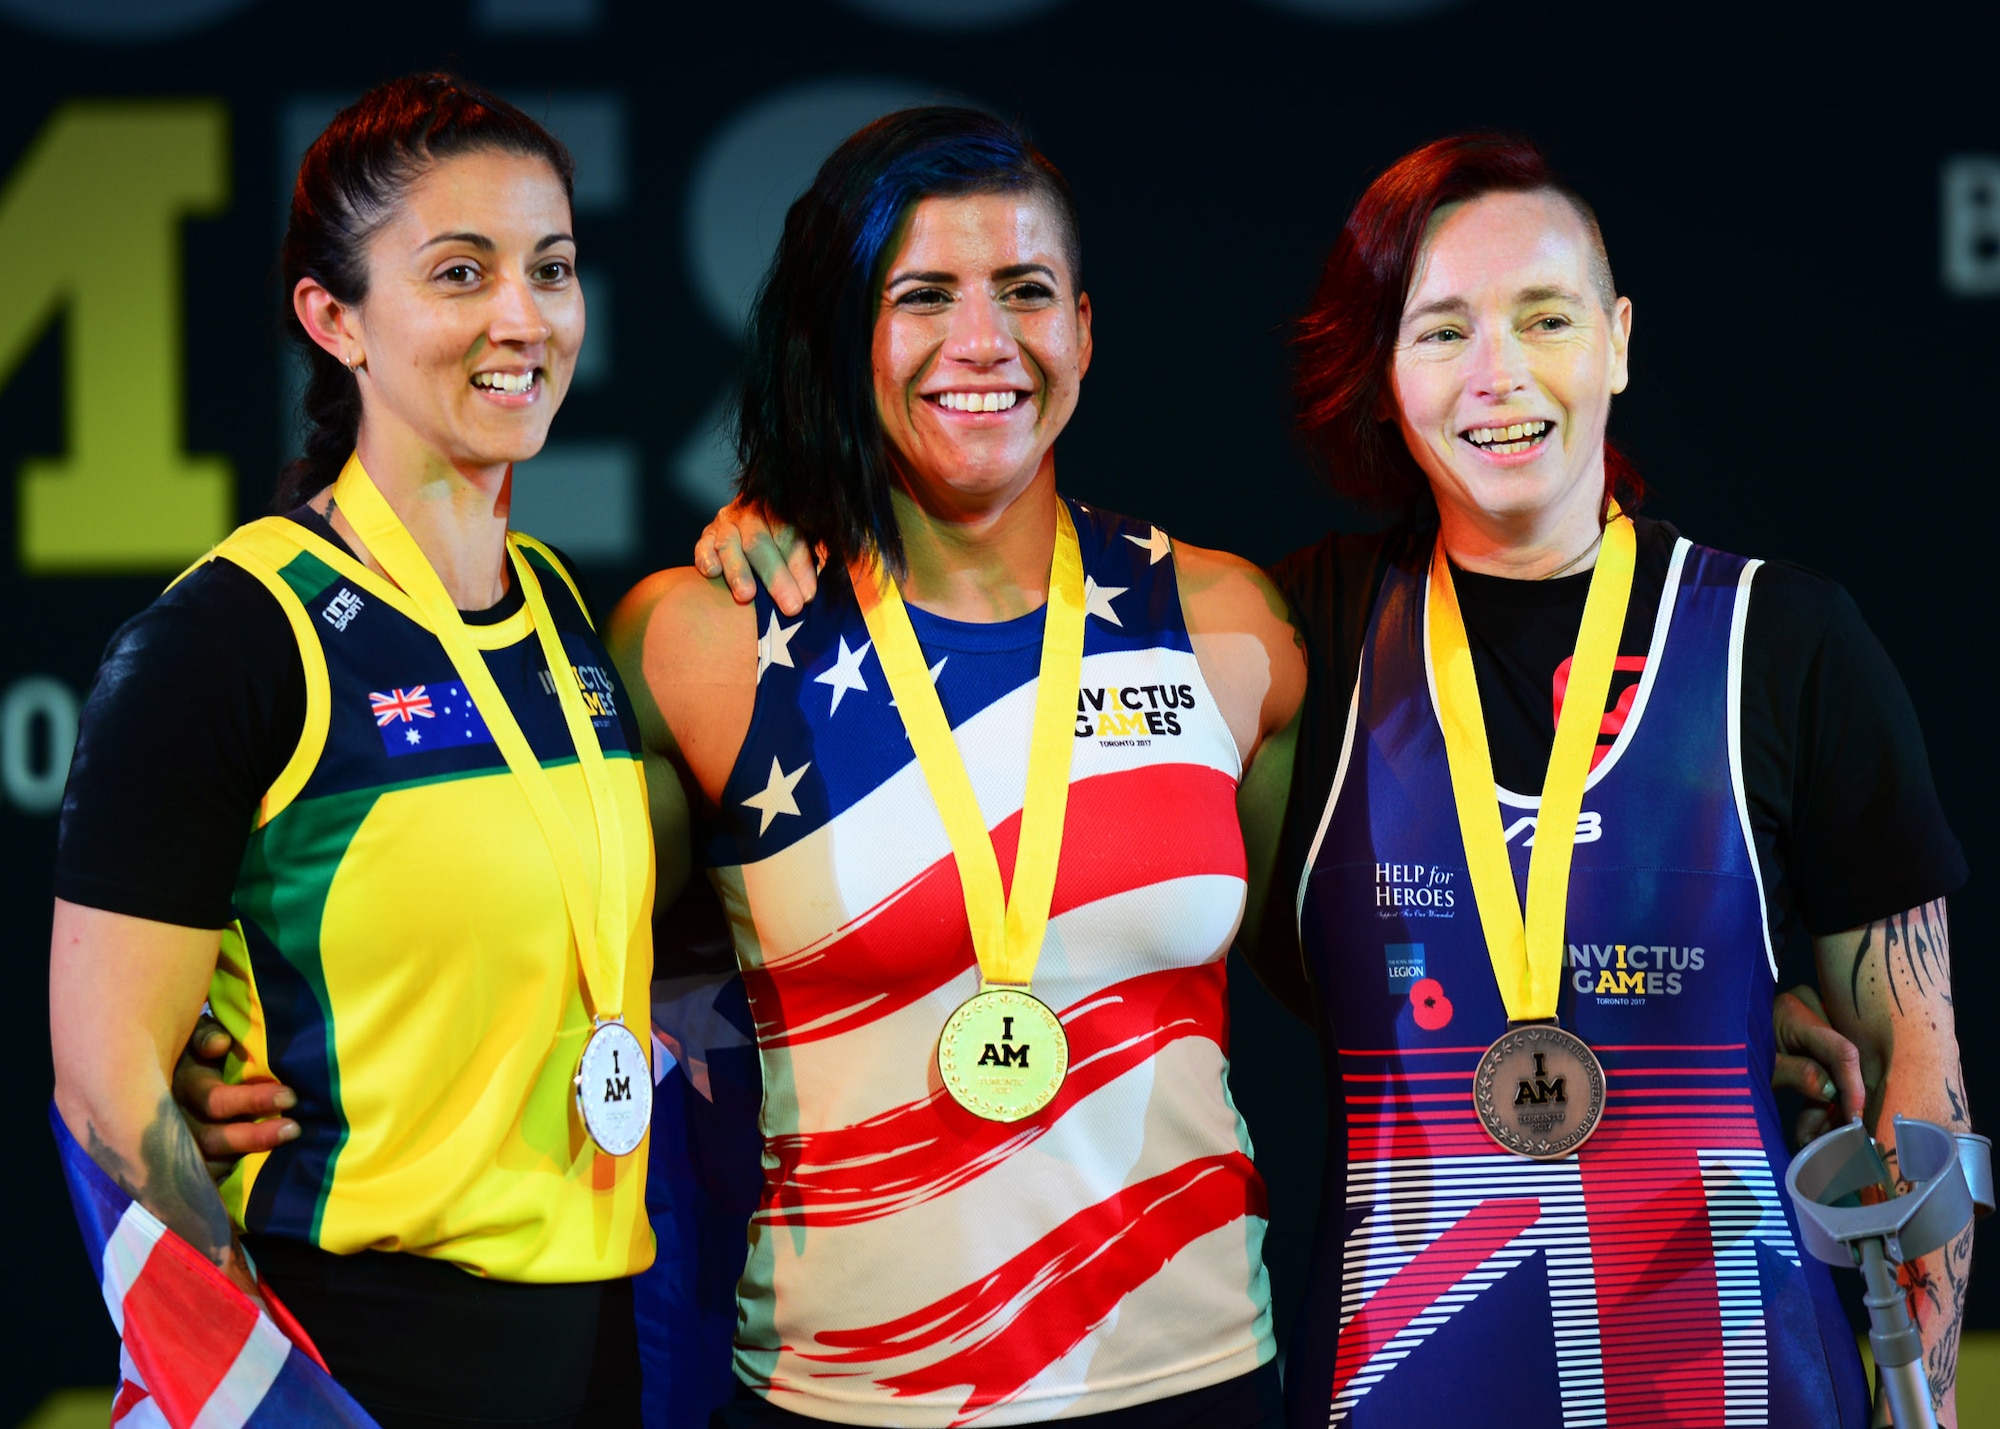 Air Force veteran Sebastiana Lopez, a former C-17 crew chief staff sergeant and member of Team U.S., stands with the silver and bronze medalists following a successful lift during the women’s lightweight powerlifting competition at the Mattamy Sports Centre in Toronto, Canada, Sept. 25, 2017. Lopez claimed gold for the U.S. team during this event as part of the 2017 Invictus Games. (U.S. Air Force photo by Staff Sgt. Chip Pons)